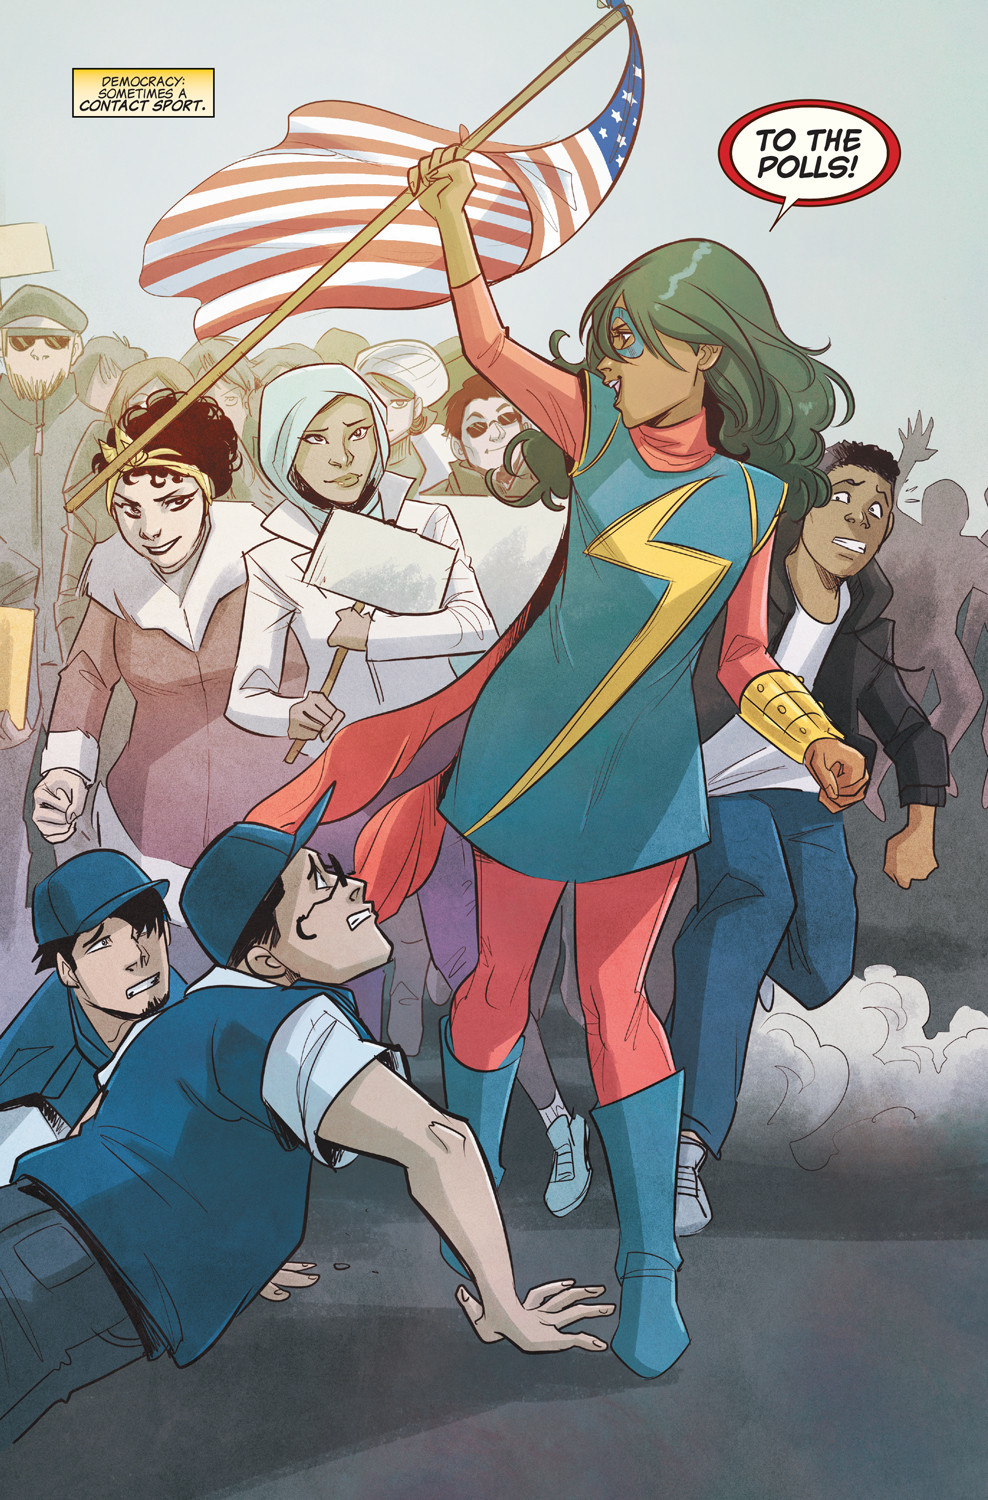 Ms. Marvel urges Americans to vote - Los Angeles Times